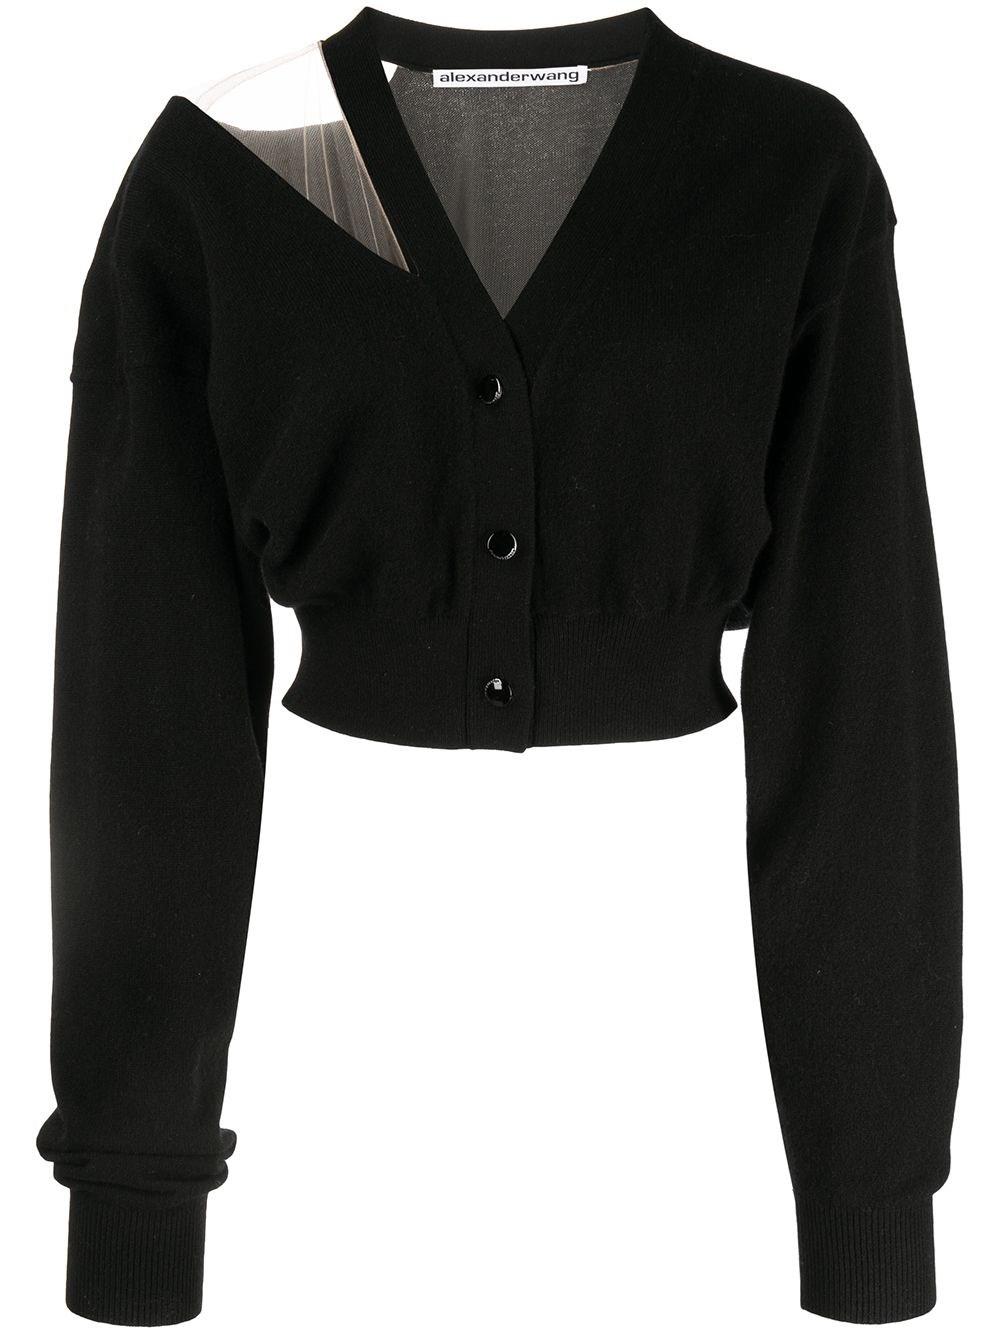 White Womens Jumpers and knitwear Jacquemus Jumpers and knitwear Jacquemus Le Cardigan Alzou Cardigan in Black - Save 5% 